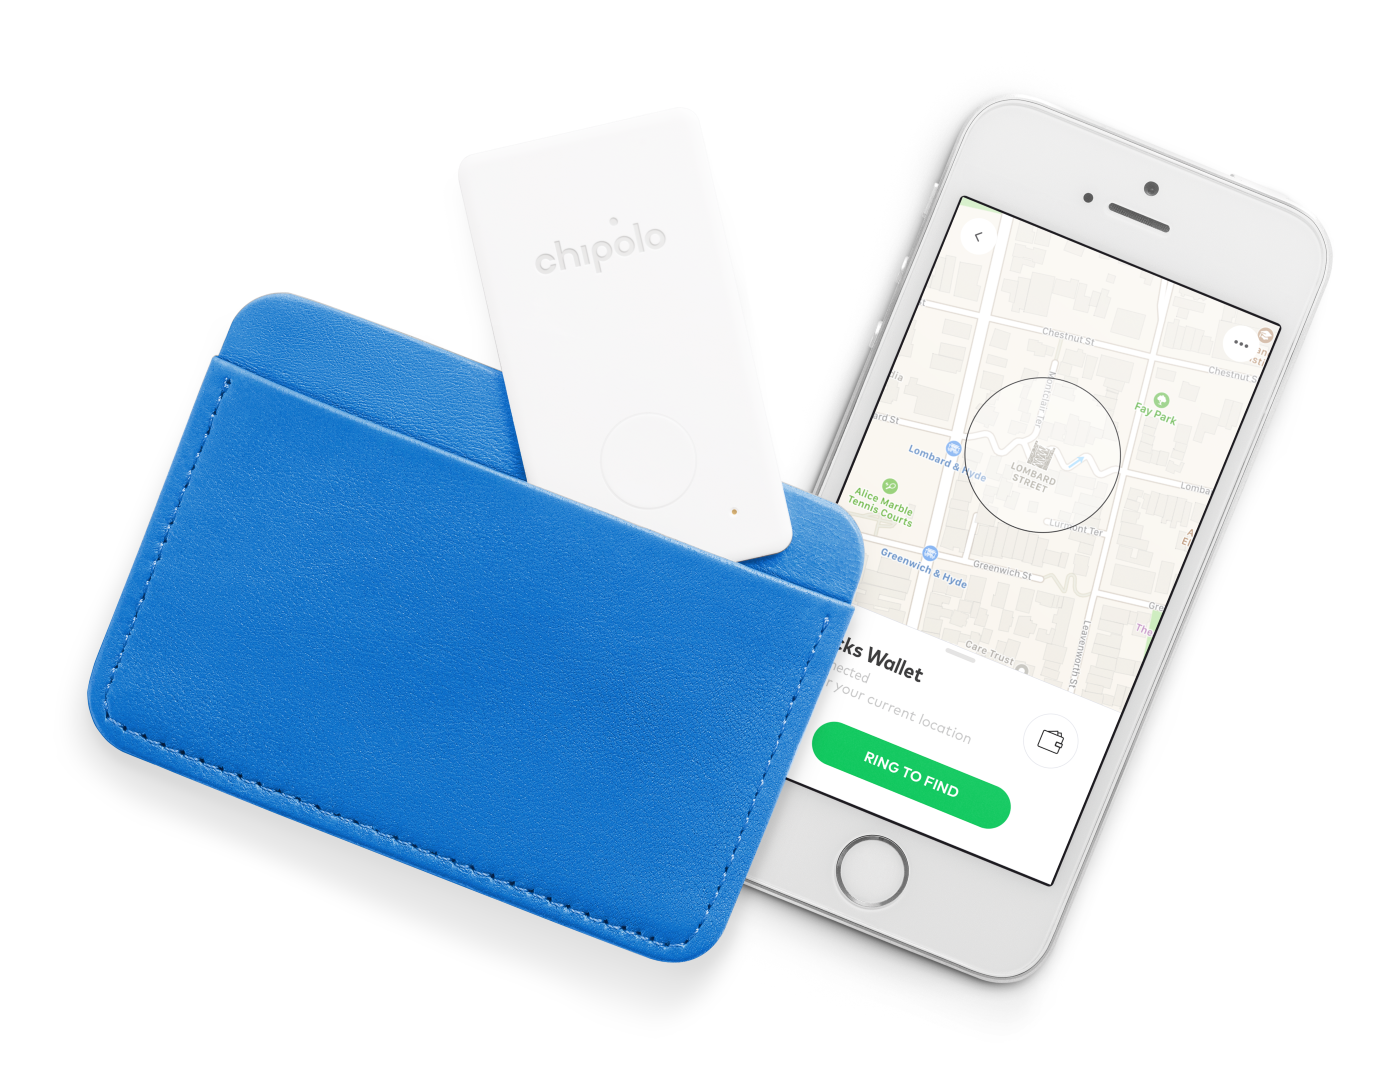 Chipolo Card Bluetooth Wallet Tracker